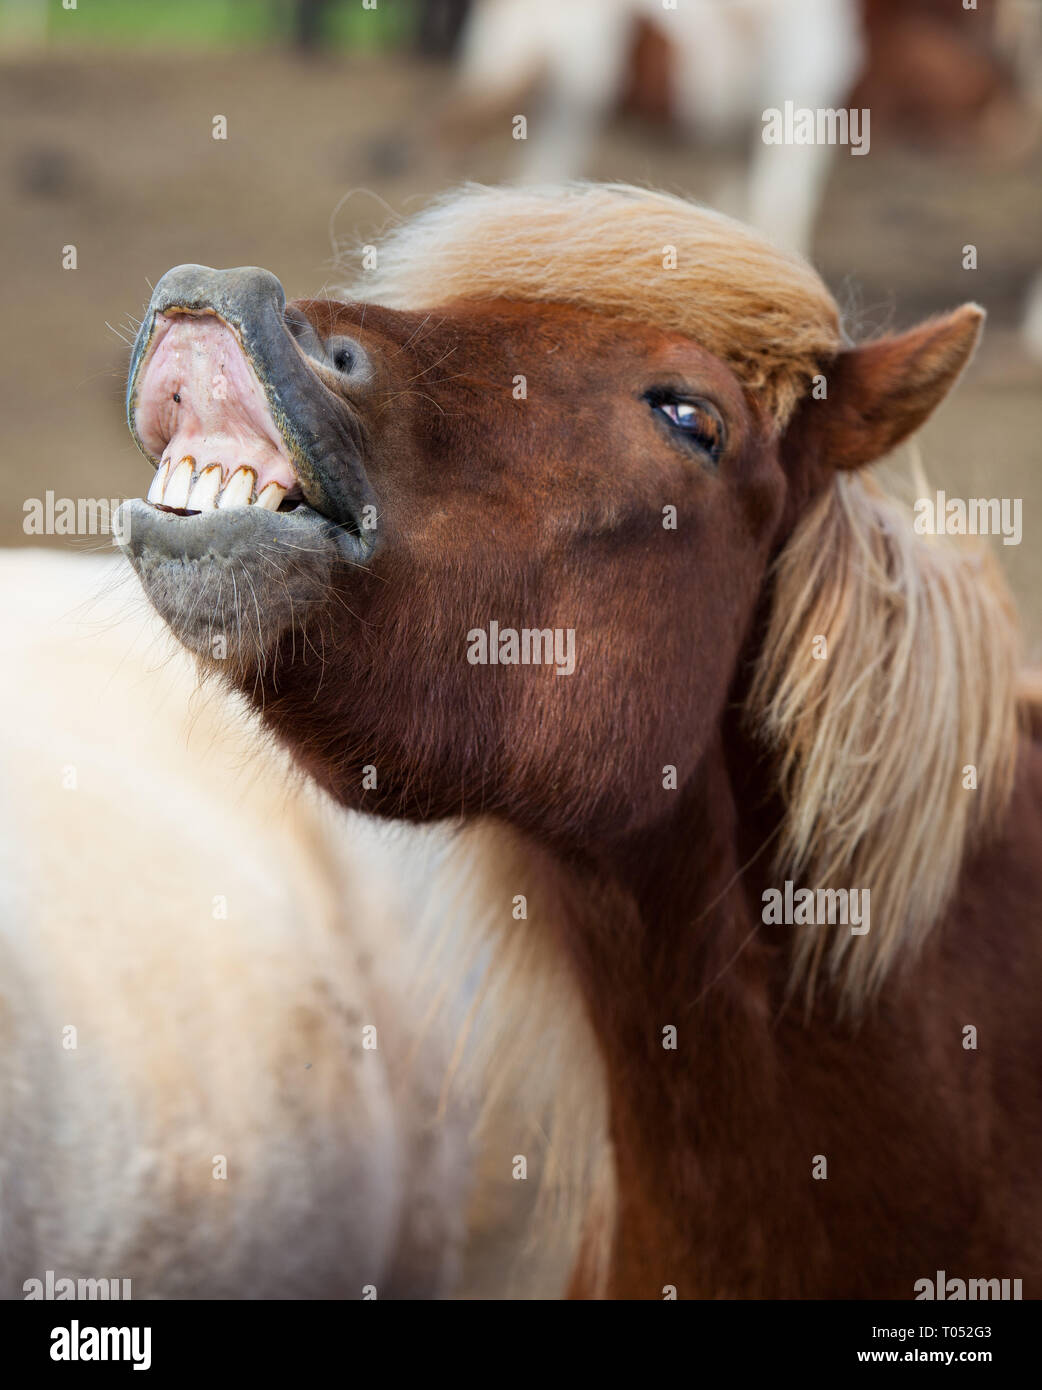 Icelandic horse smiling and laughing with large teeth. Stock Photo